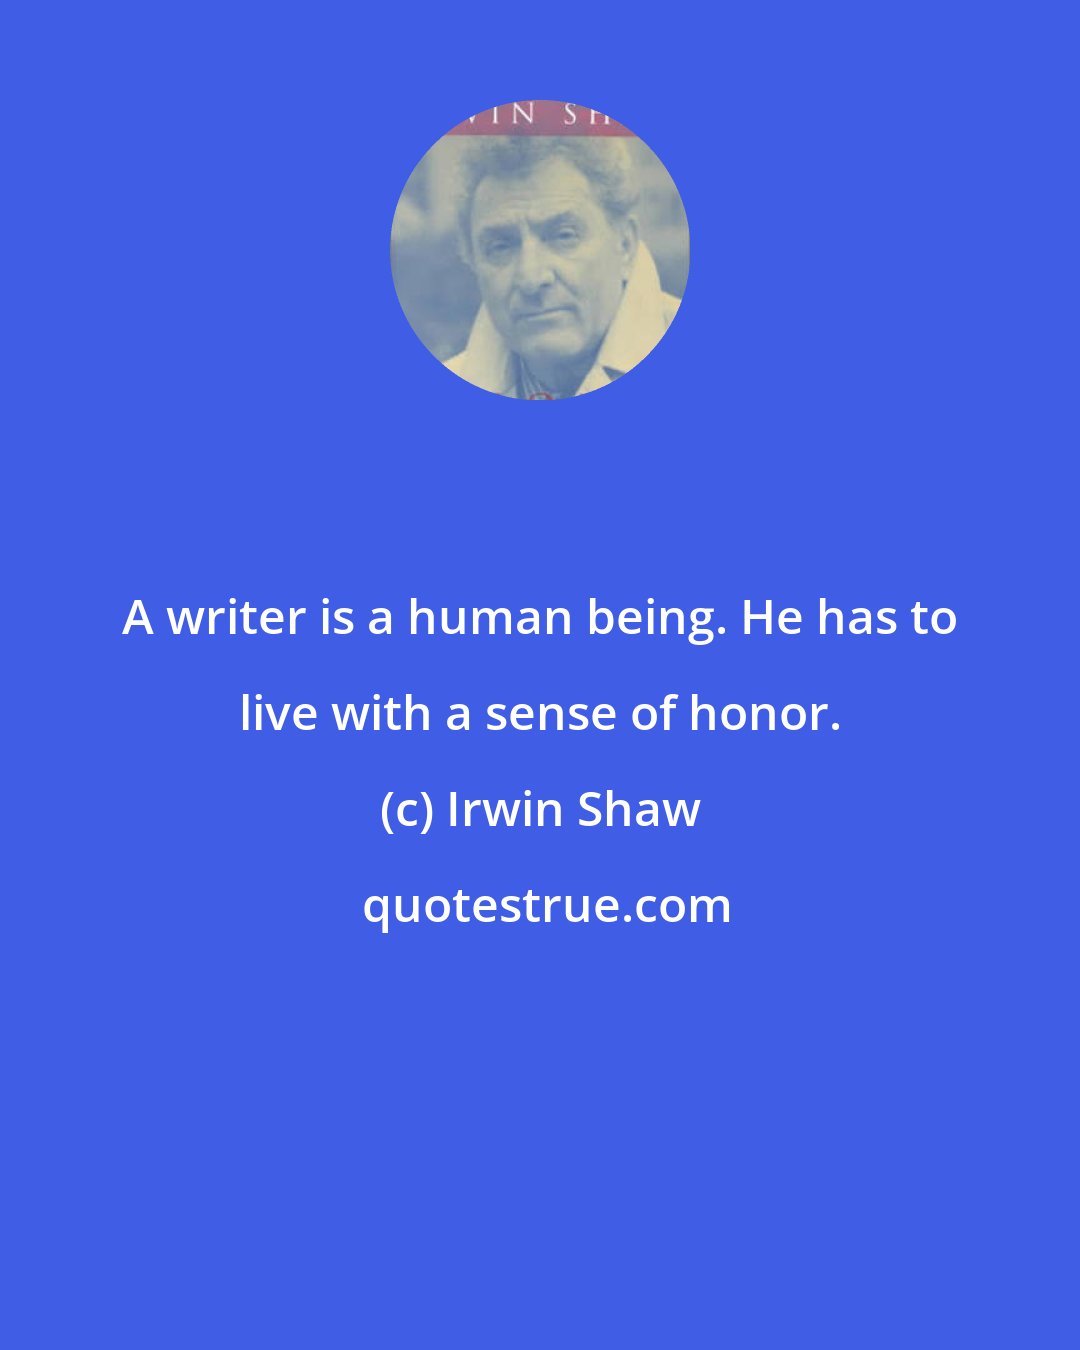 Irwin Shaw: A writer is a human being. He has to live with a sense of honor.